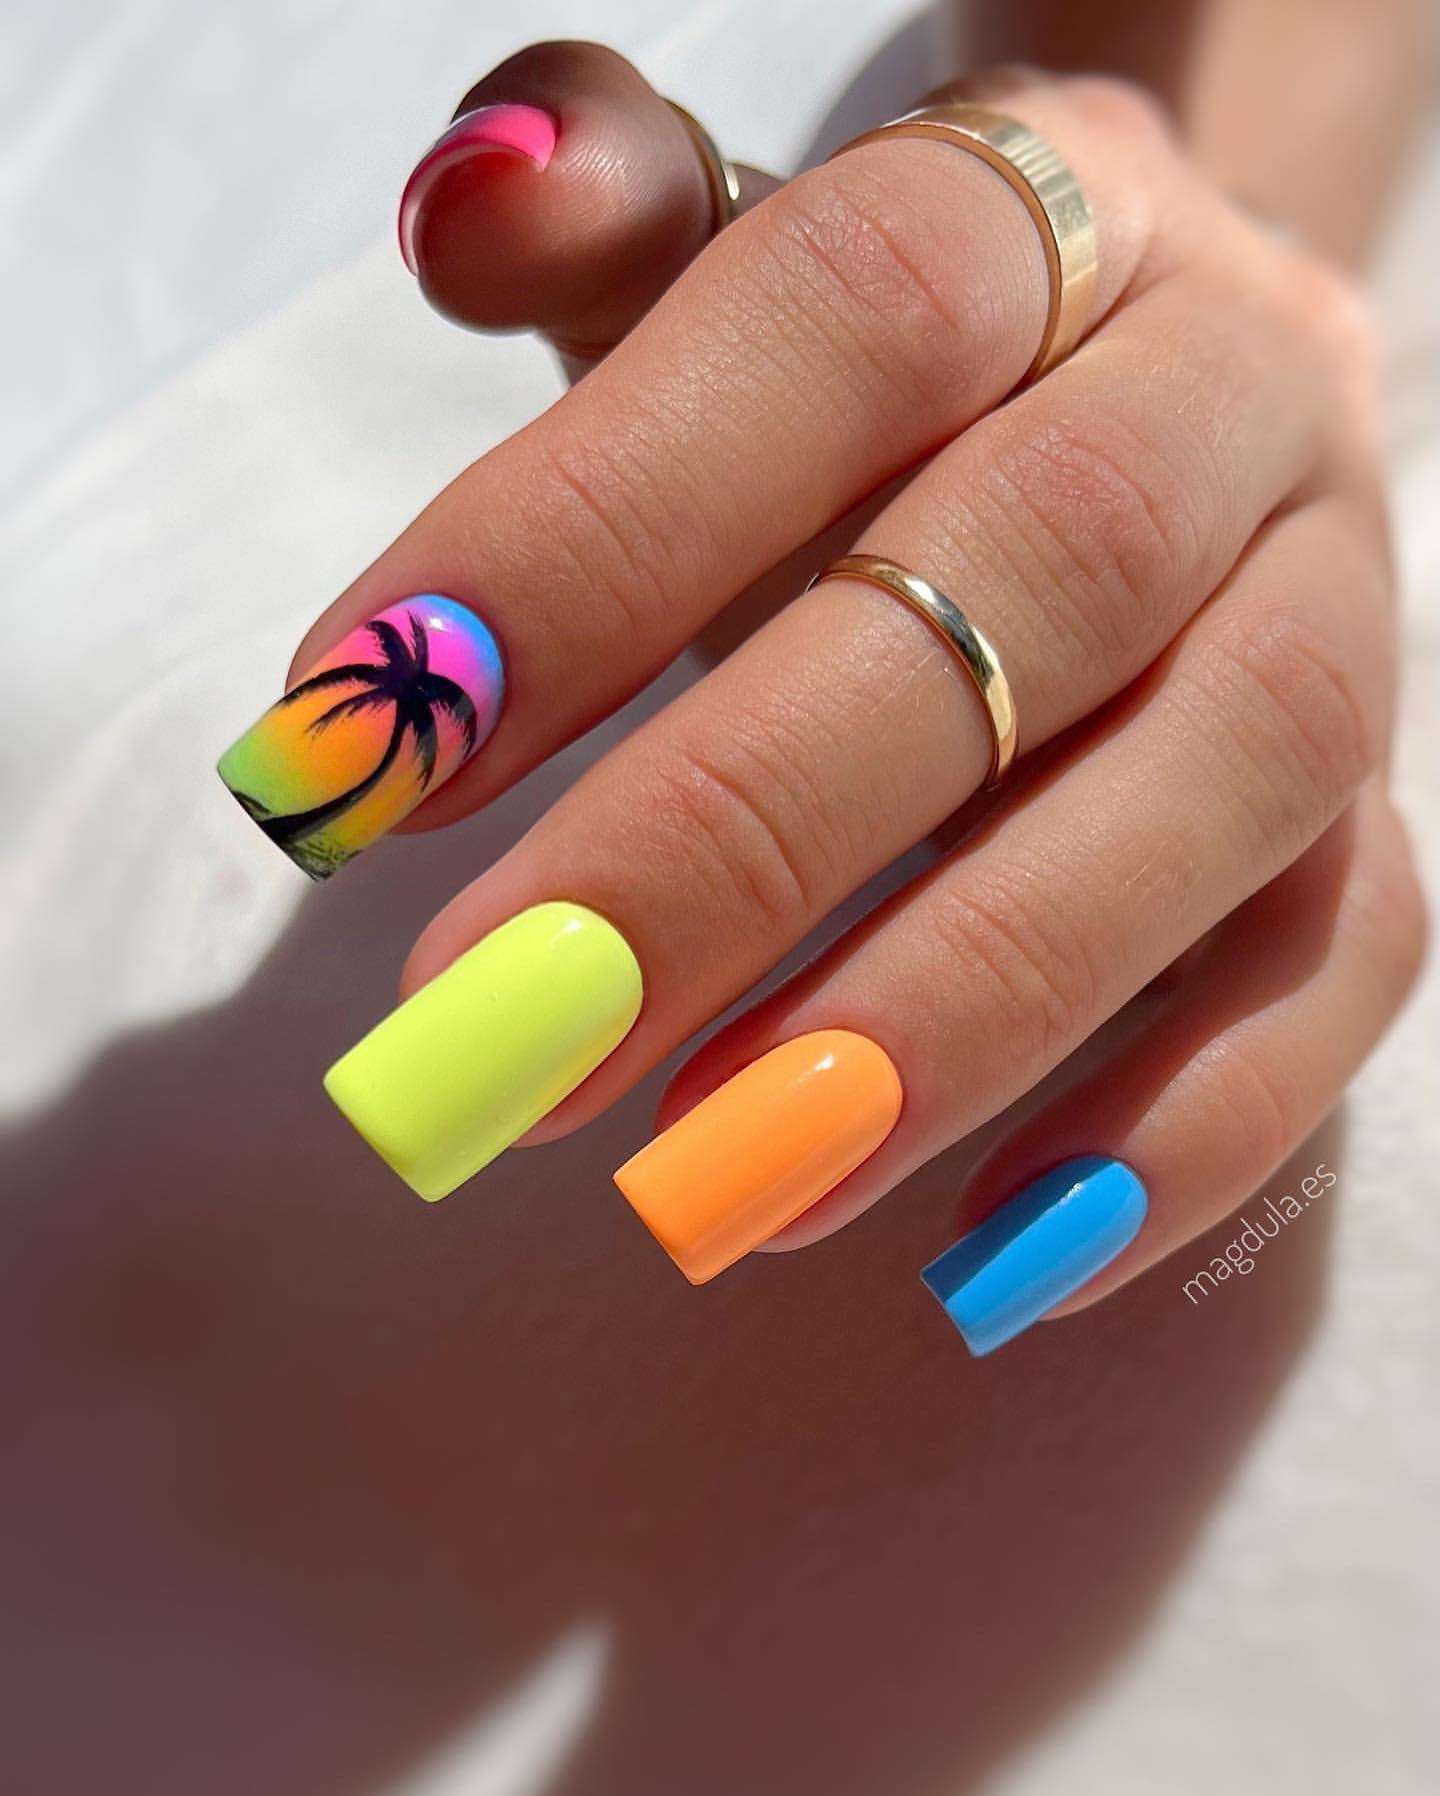 100+ Must Try Fall Nail Art Designs And Nail Ideas images 68